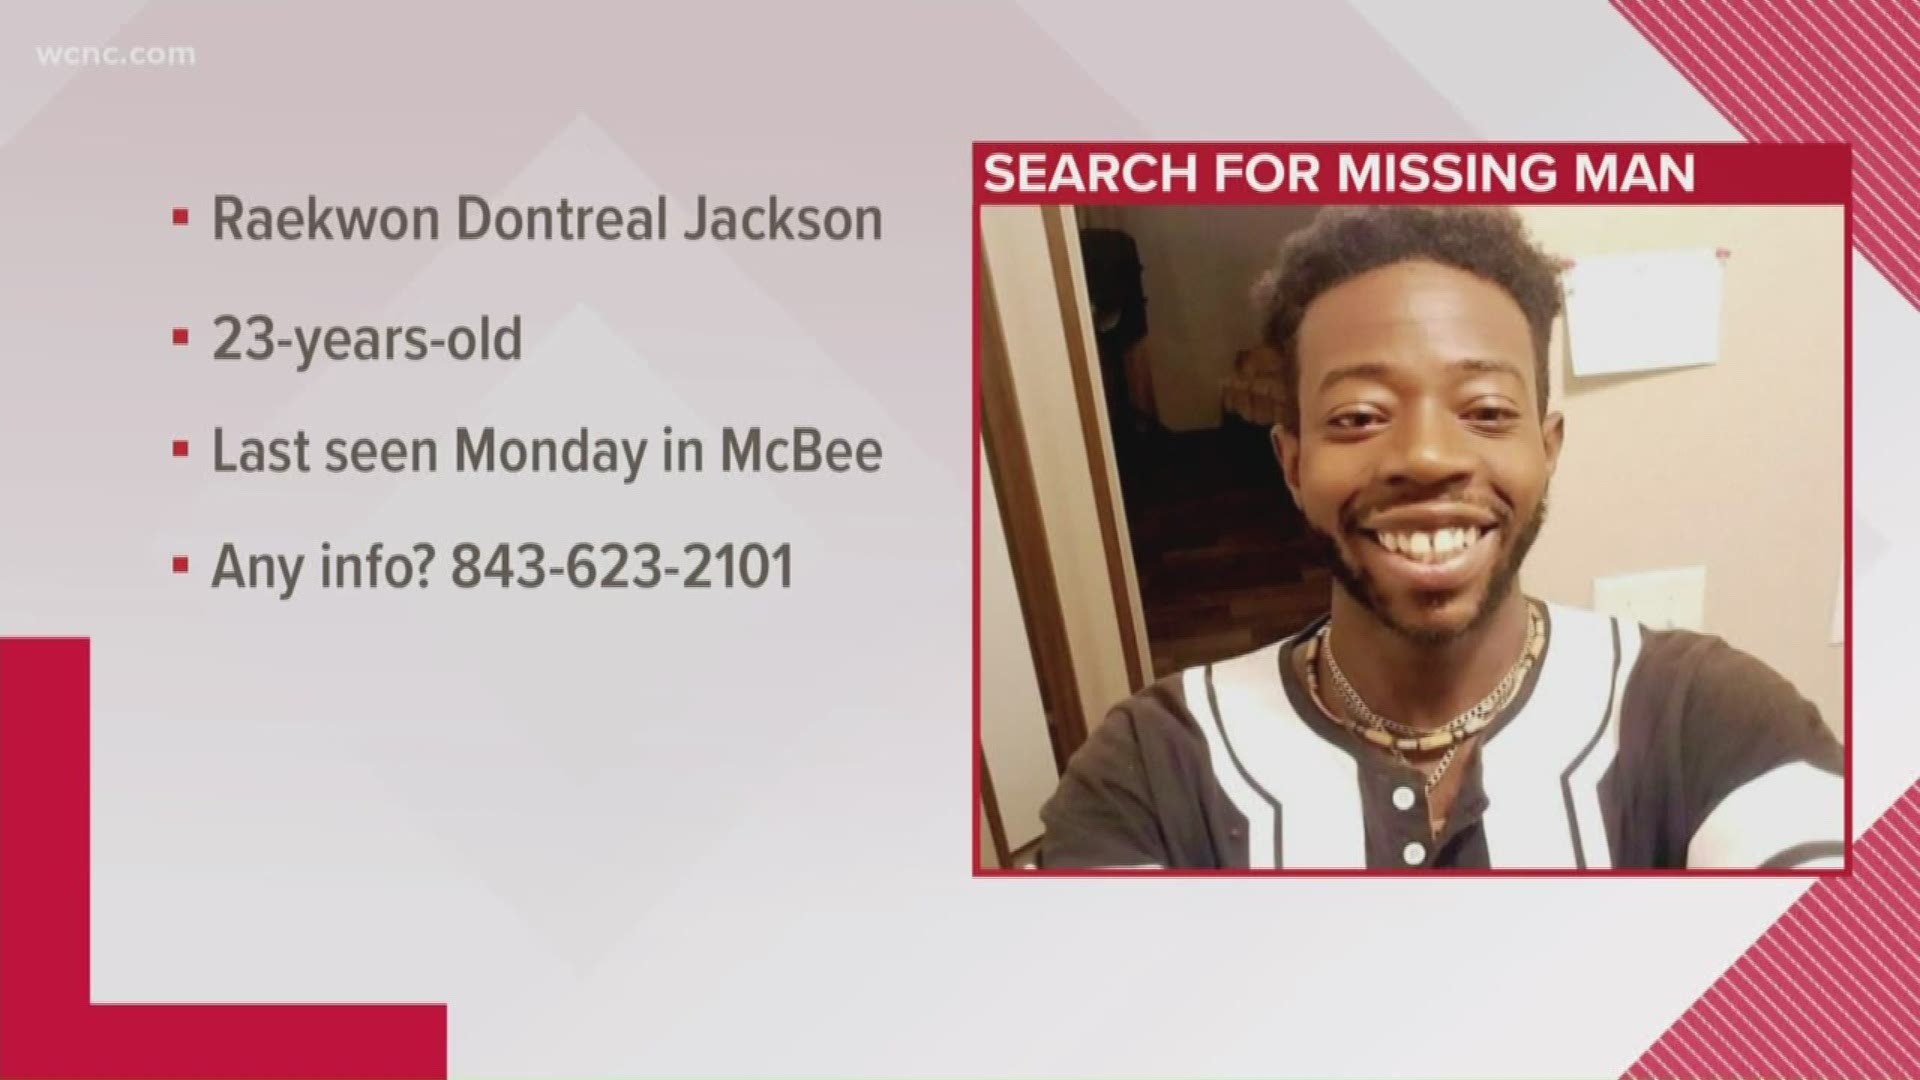 He was last seen Monday morning waling from his house. Officers said he was wearing a blue jacket, jeans, and black shoes.